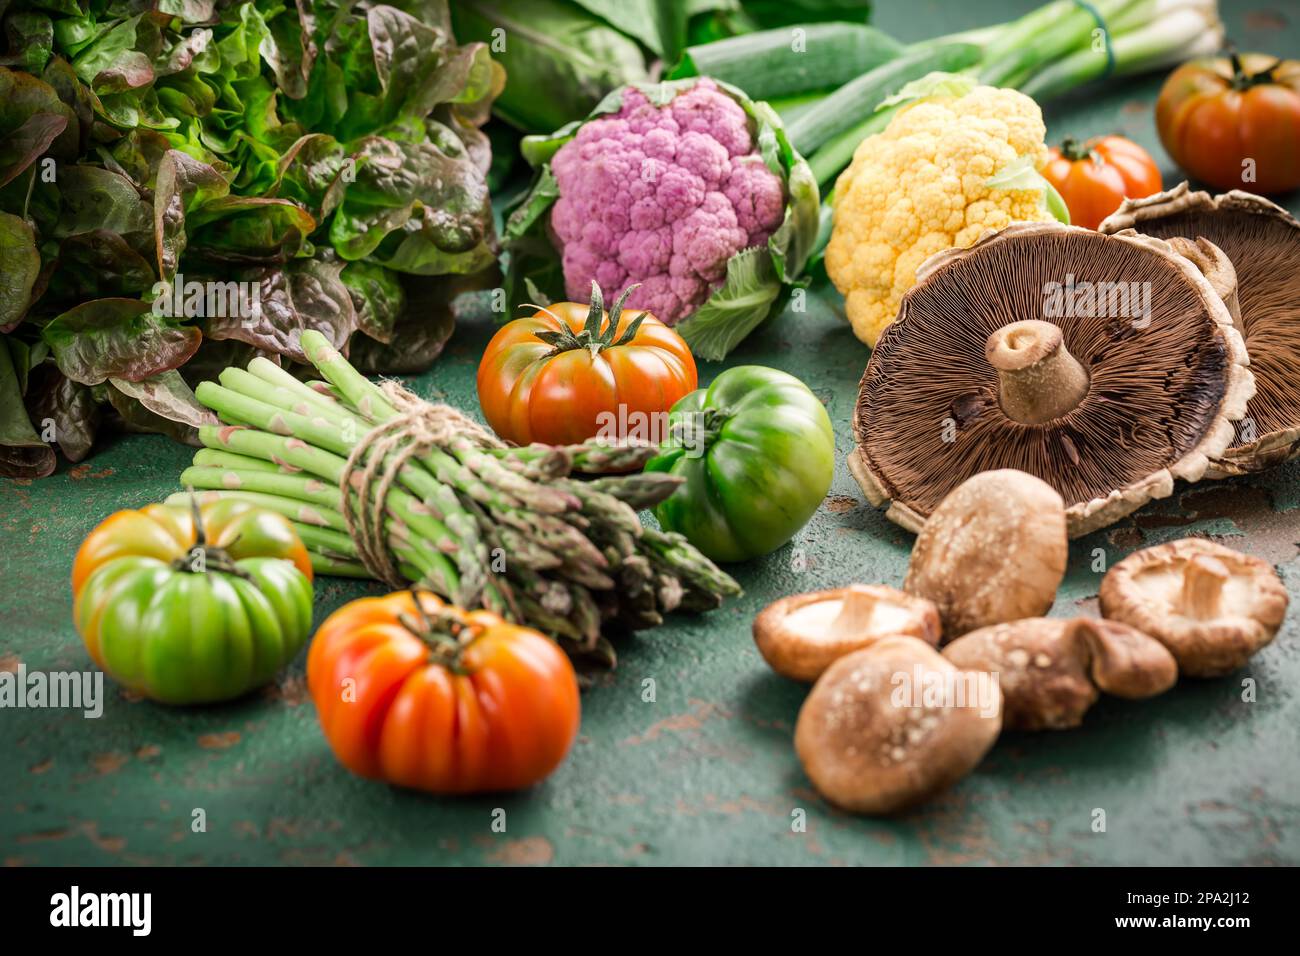 Assortment of organic vegetables and edible mushrooms on green background Stock Photo